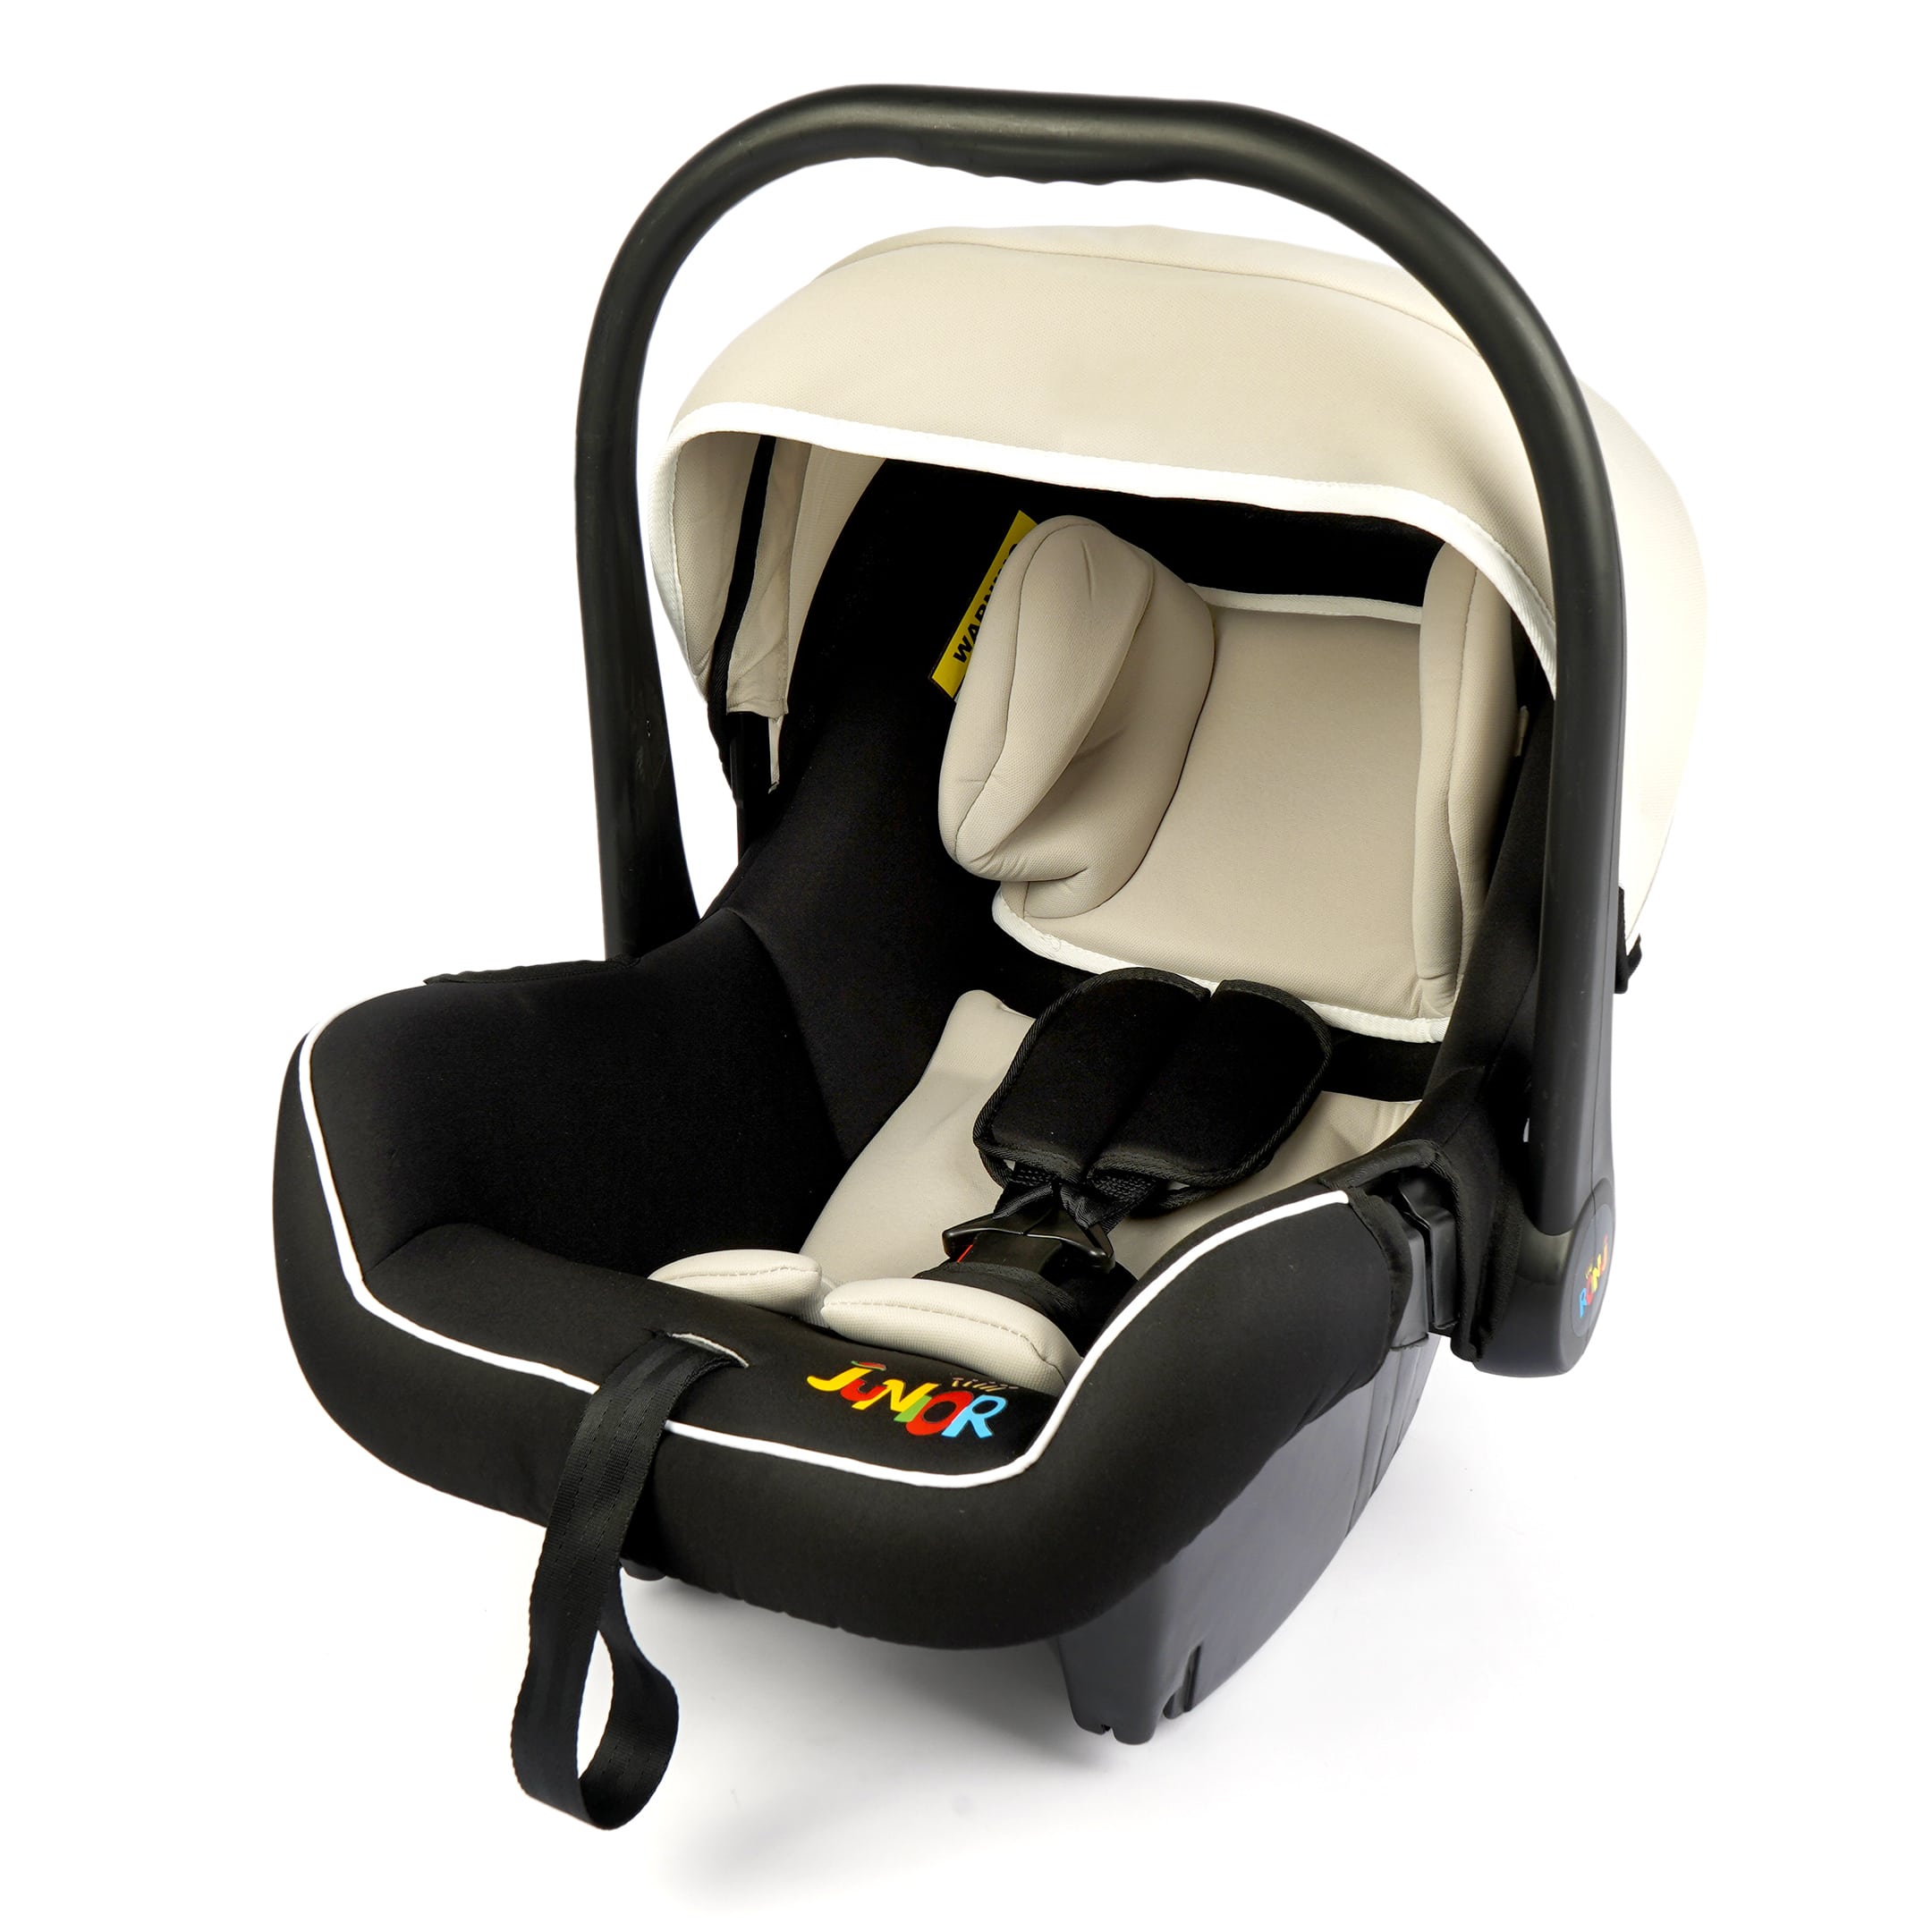 High-Quality Baby Carry Cot Car Seat